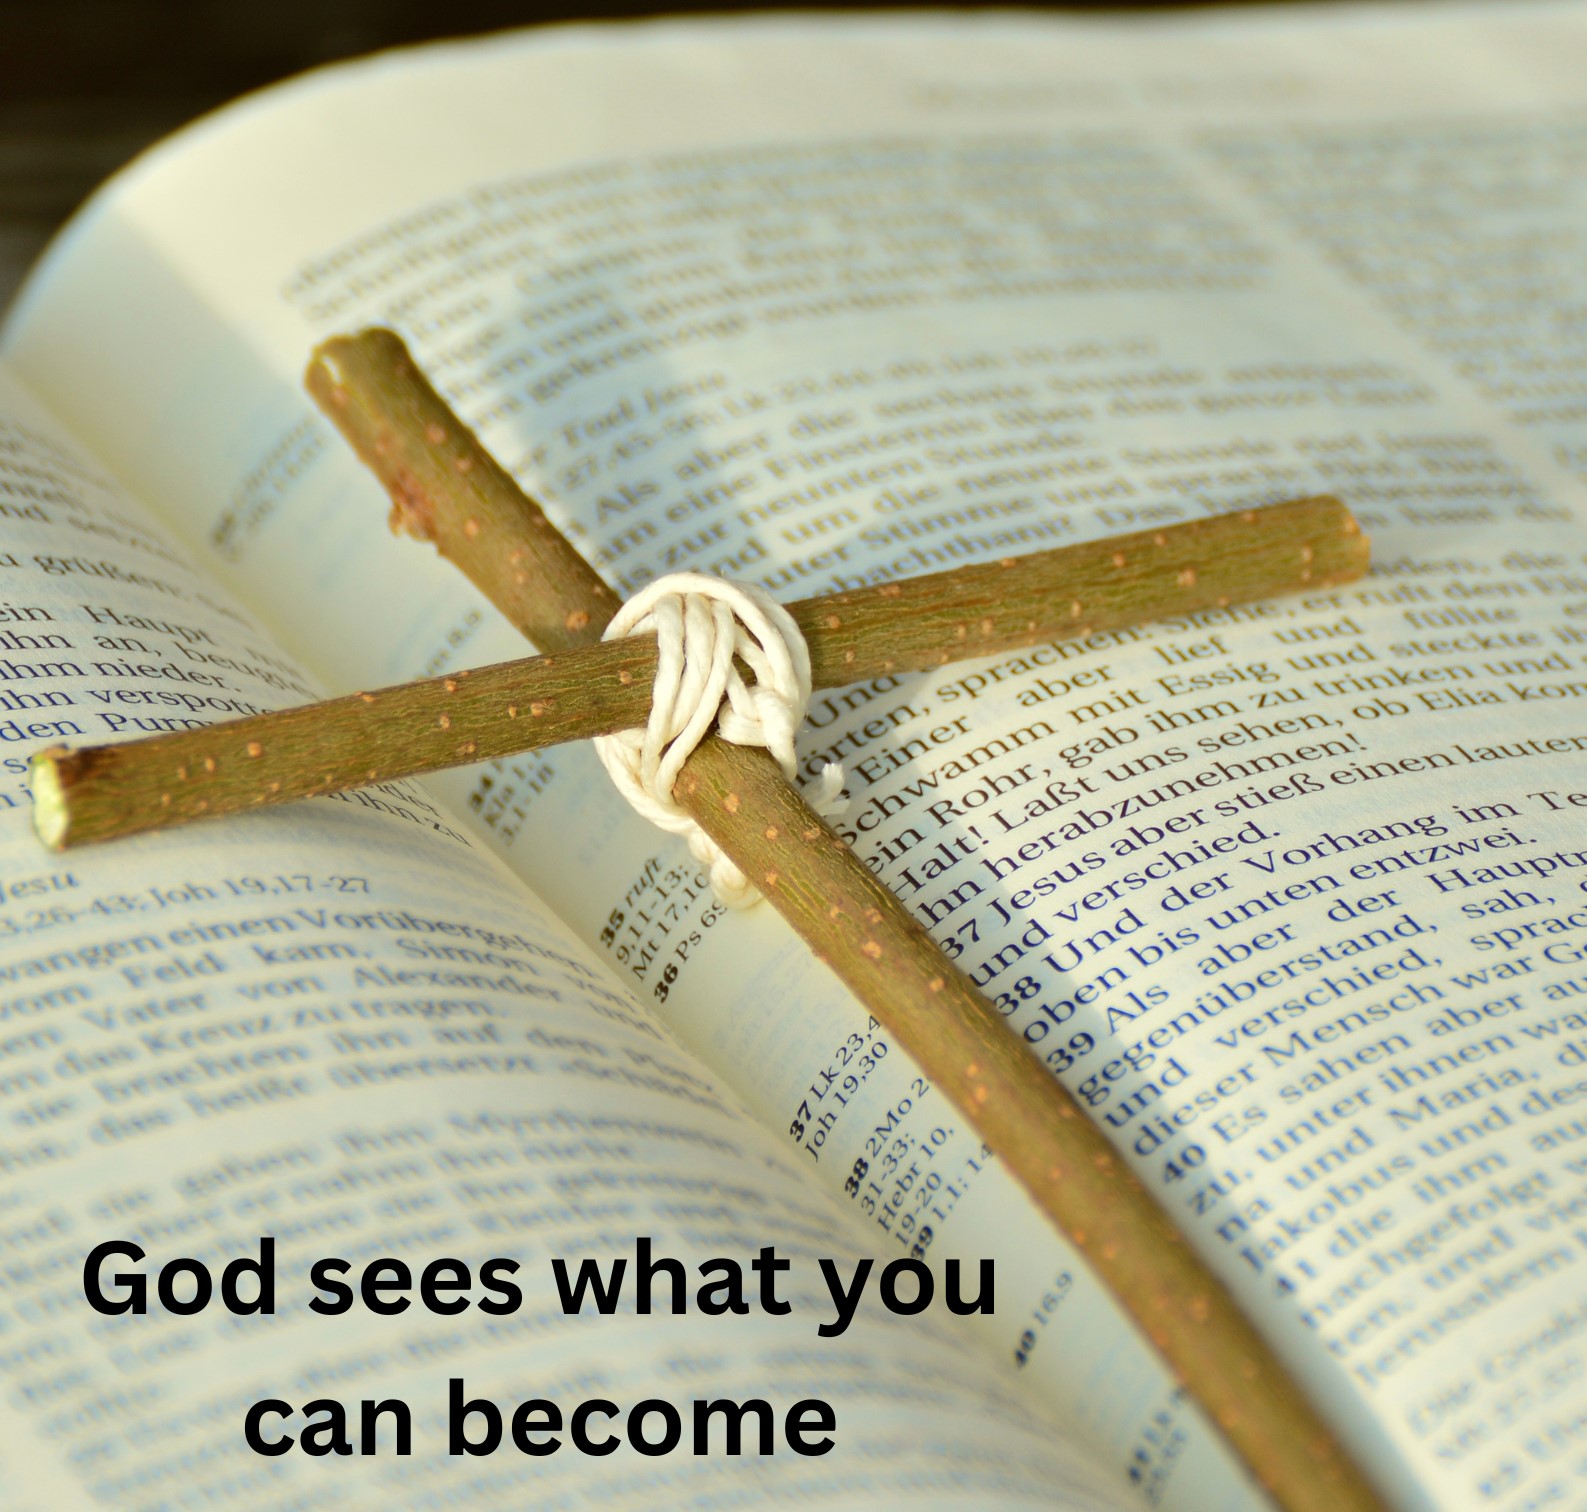 God sees what you can become